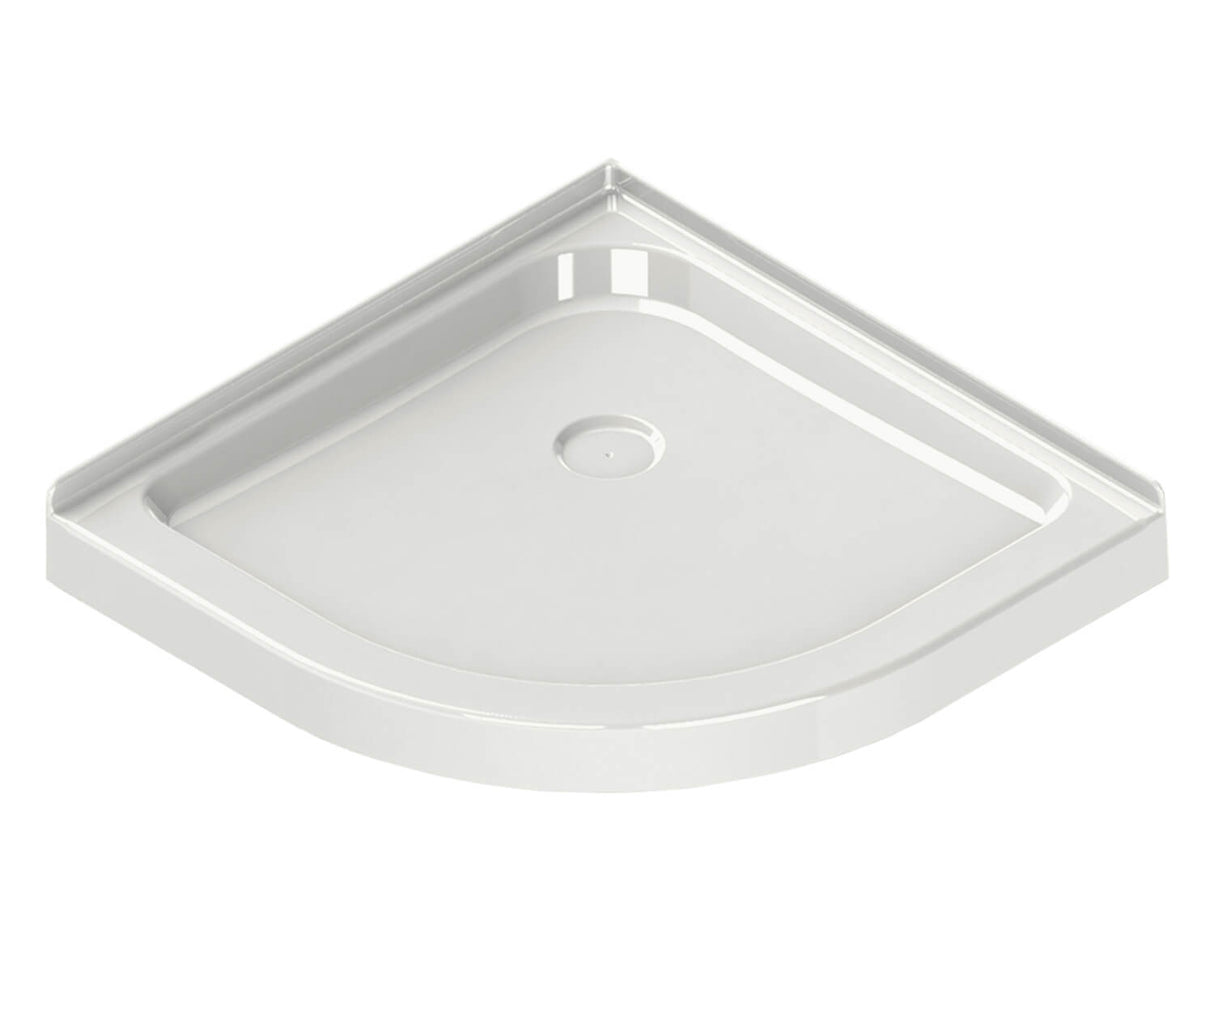 MAAX 101427-000-001-000 Neo-round Base 36 3 in. 36 x 36 Acrylic Corner Left or Right Shower Base with Corner Drain in White